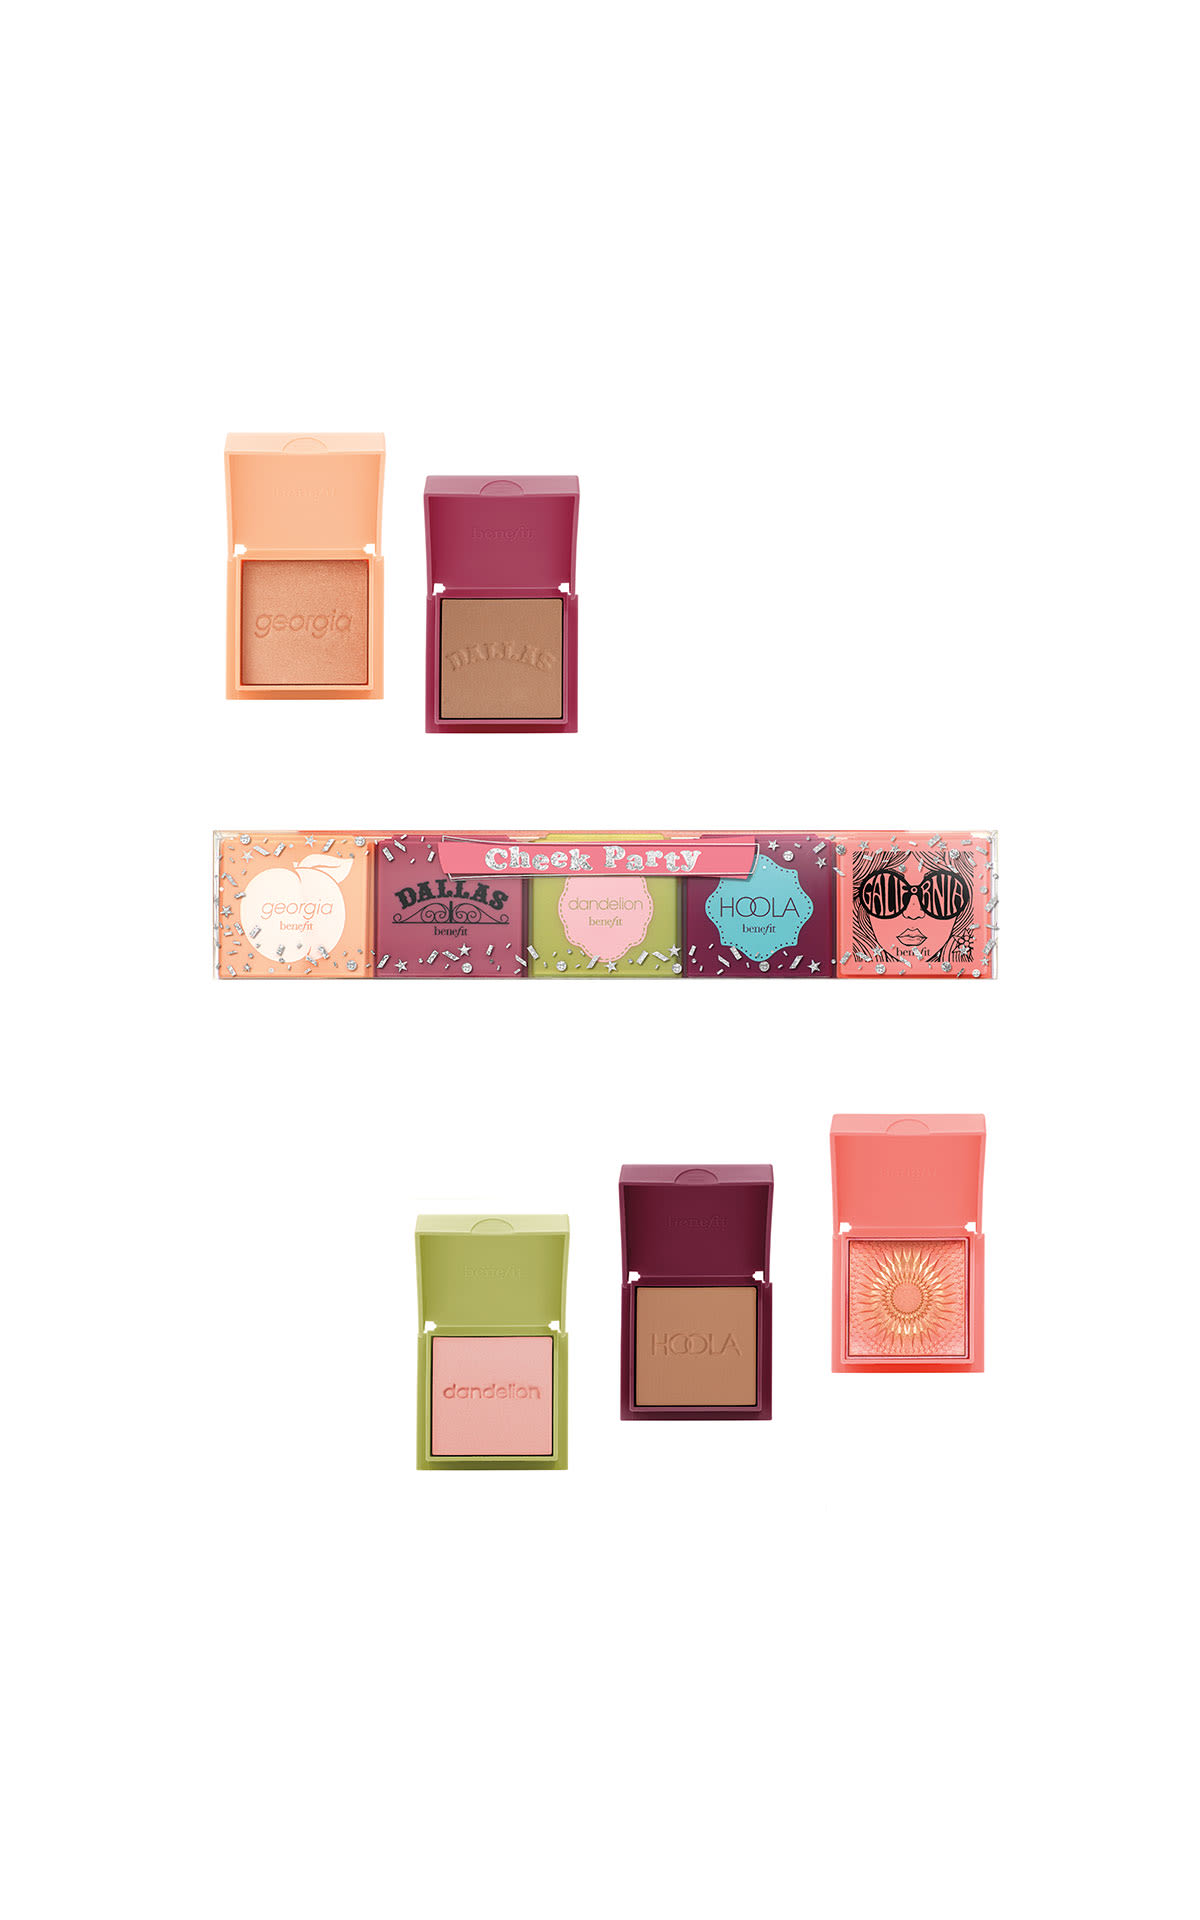 Benefit Cosmetics Cheek party from Bicester Village